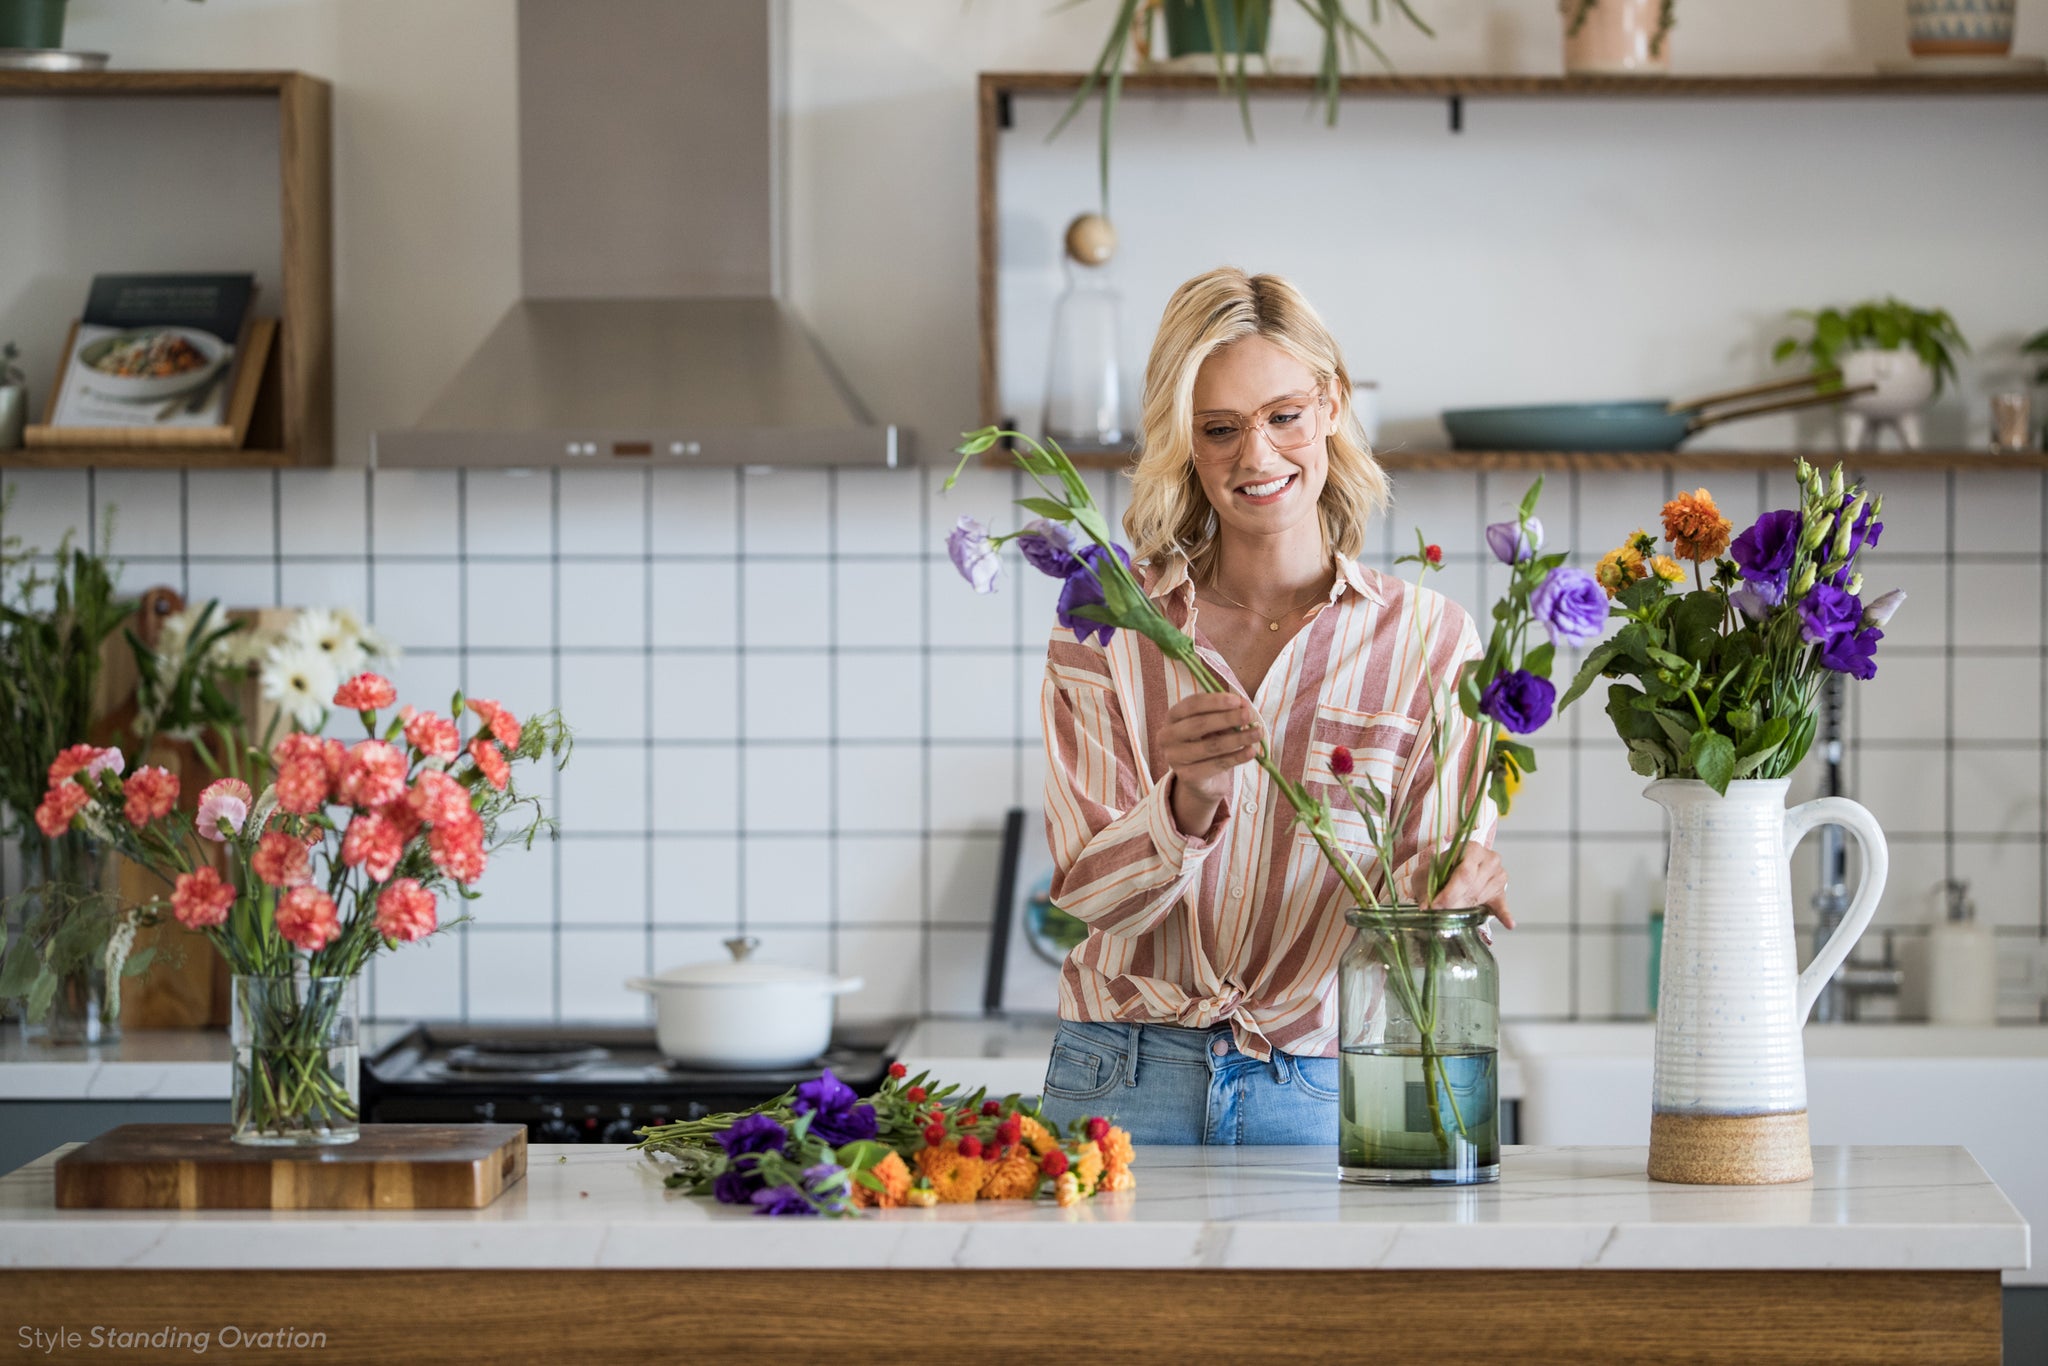 Blonde woman arranging flowers in her kitchen and wearing Peepers Standing Ovation blue light reading glasses